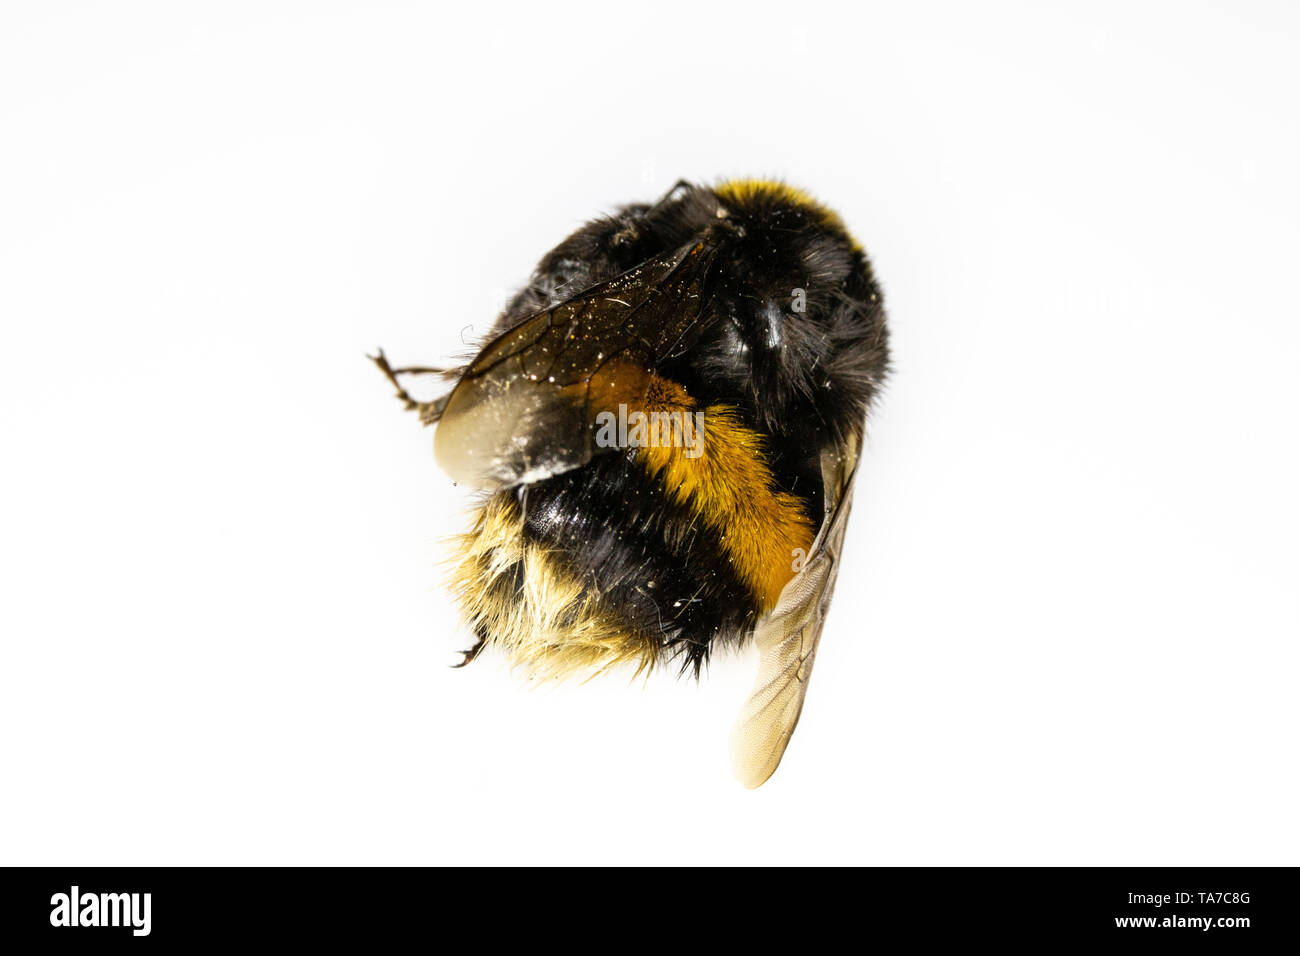 Dead Bumblebee Bee Insect on White Background Stock Photo